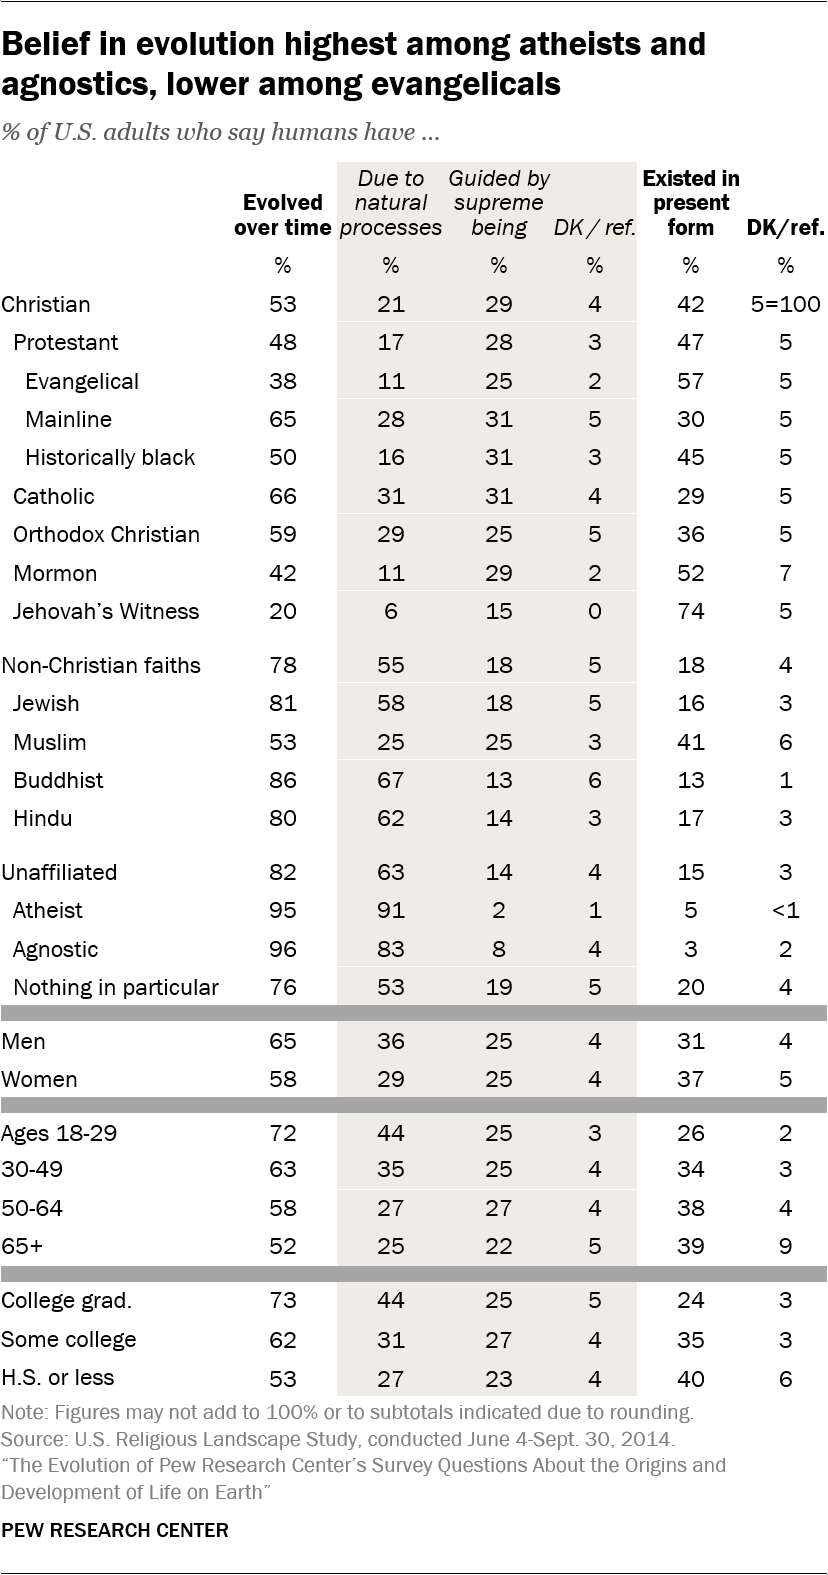 Belief in evolution highest among atheists and agnostics, lower among evangelicals